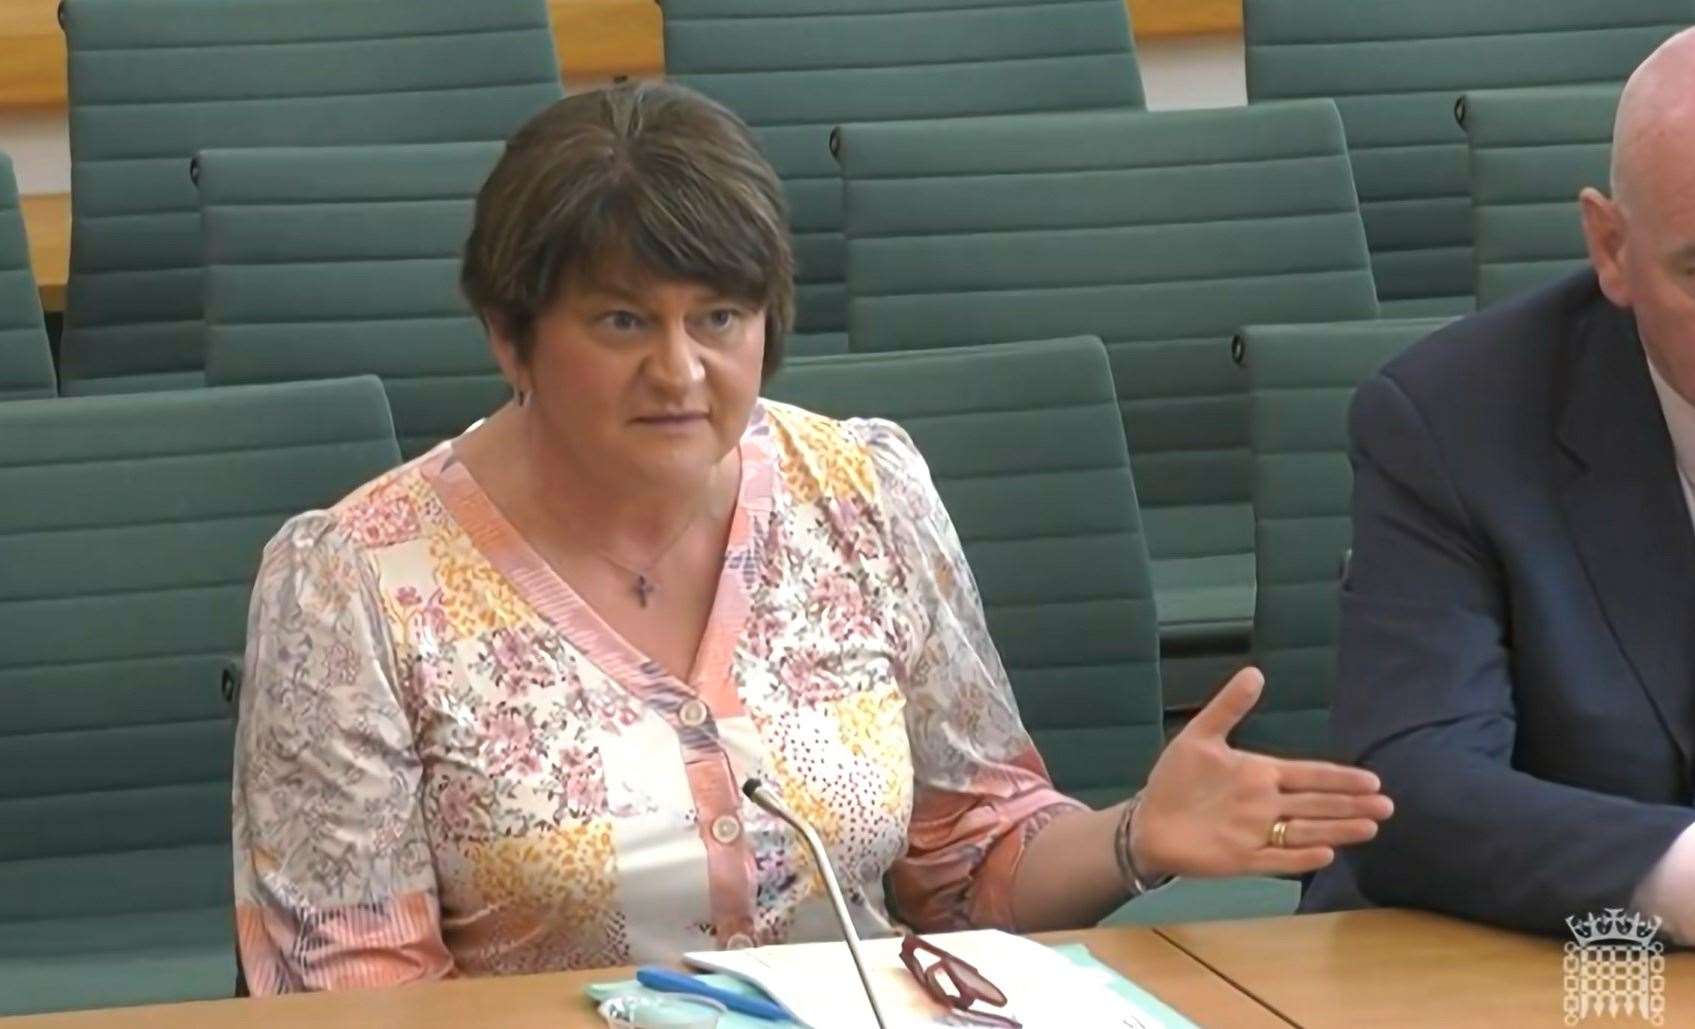 Dame Arlene Foster was giving evidence to the Northern Ireland Affairs Committee (House of Commons/UK Parliament/PA)